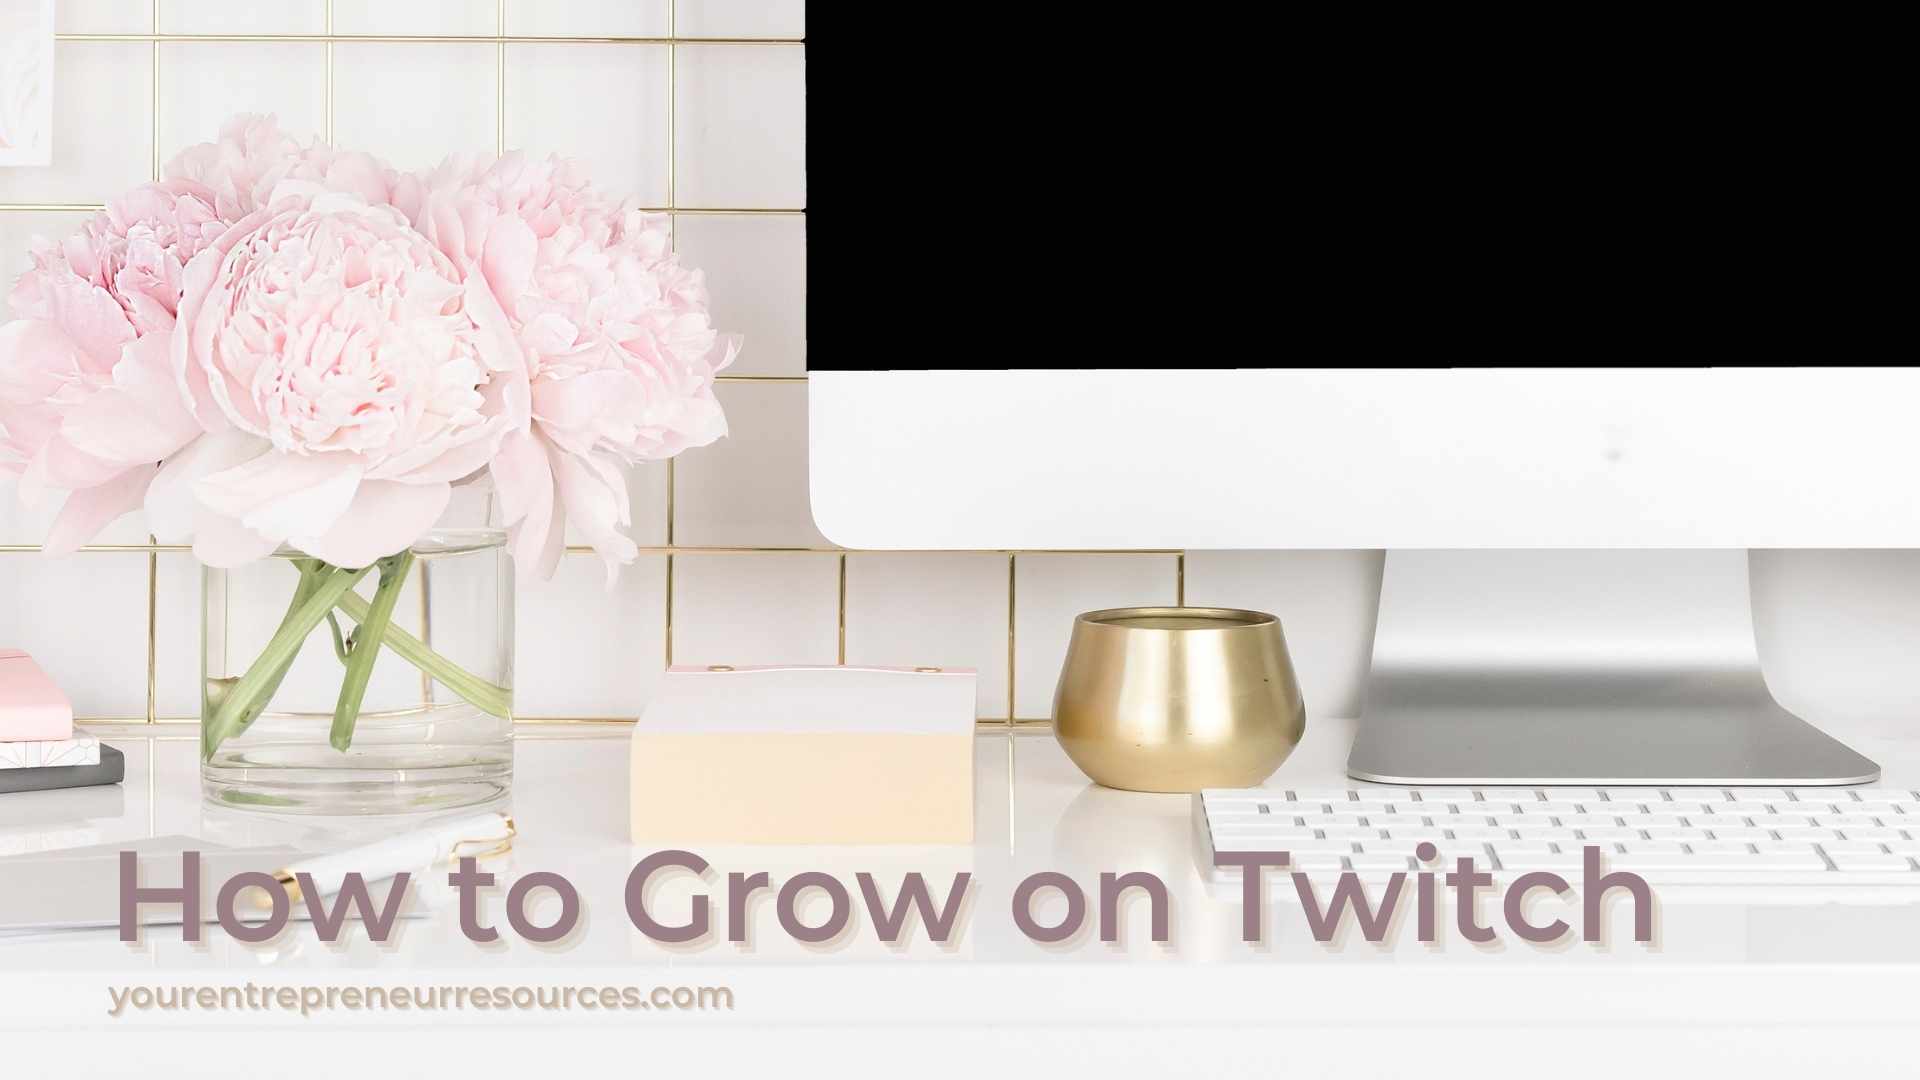 How To Grow On Twitch 5 Tips For Livestreaming And Grow Twitch